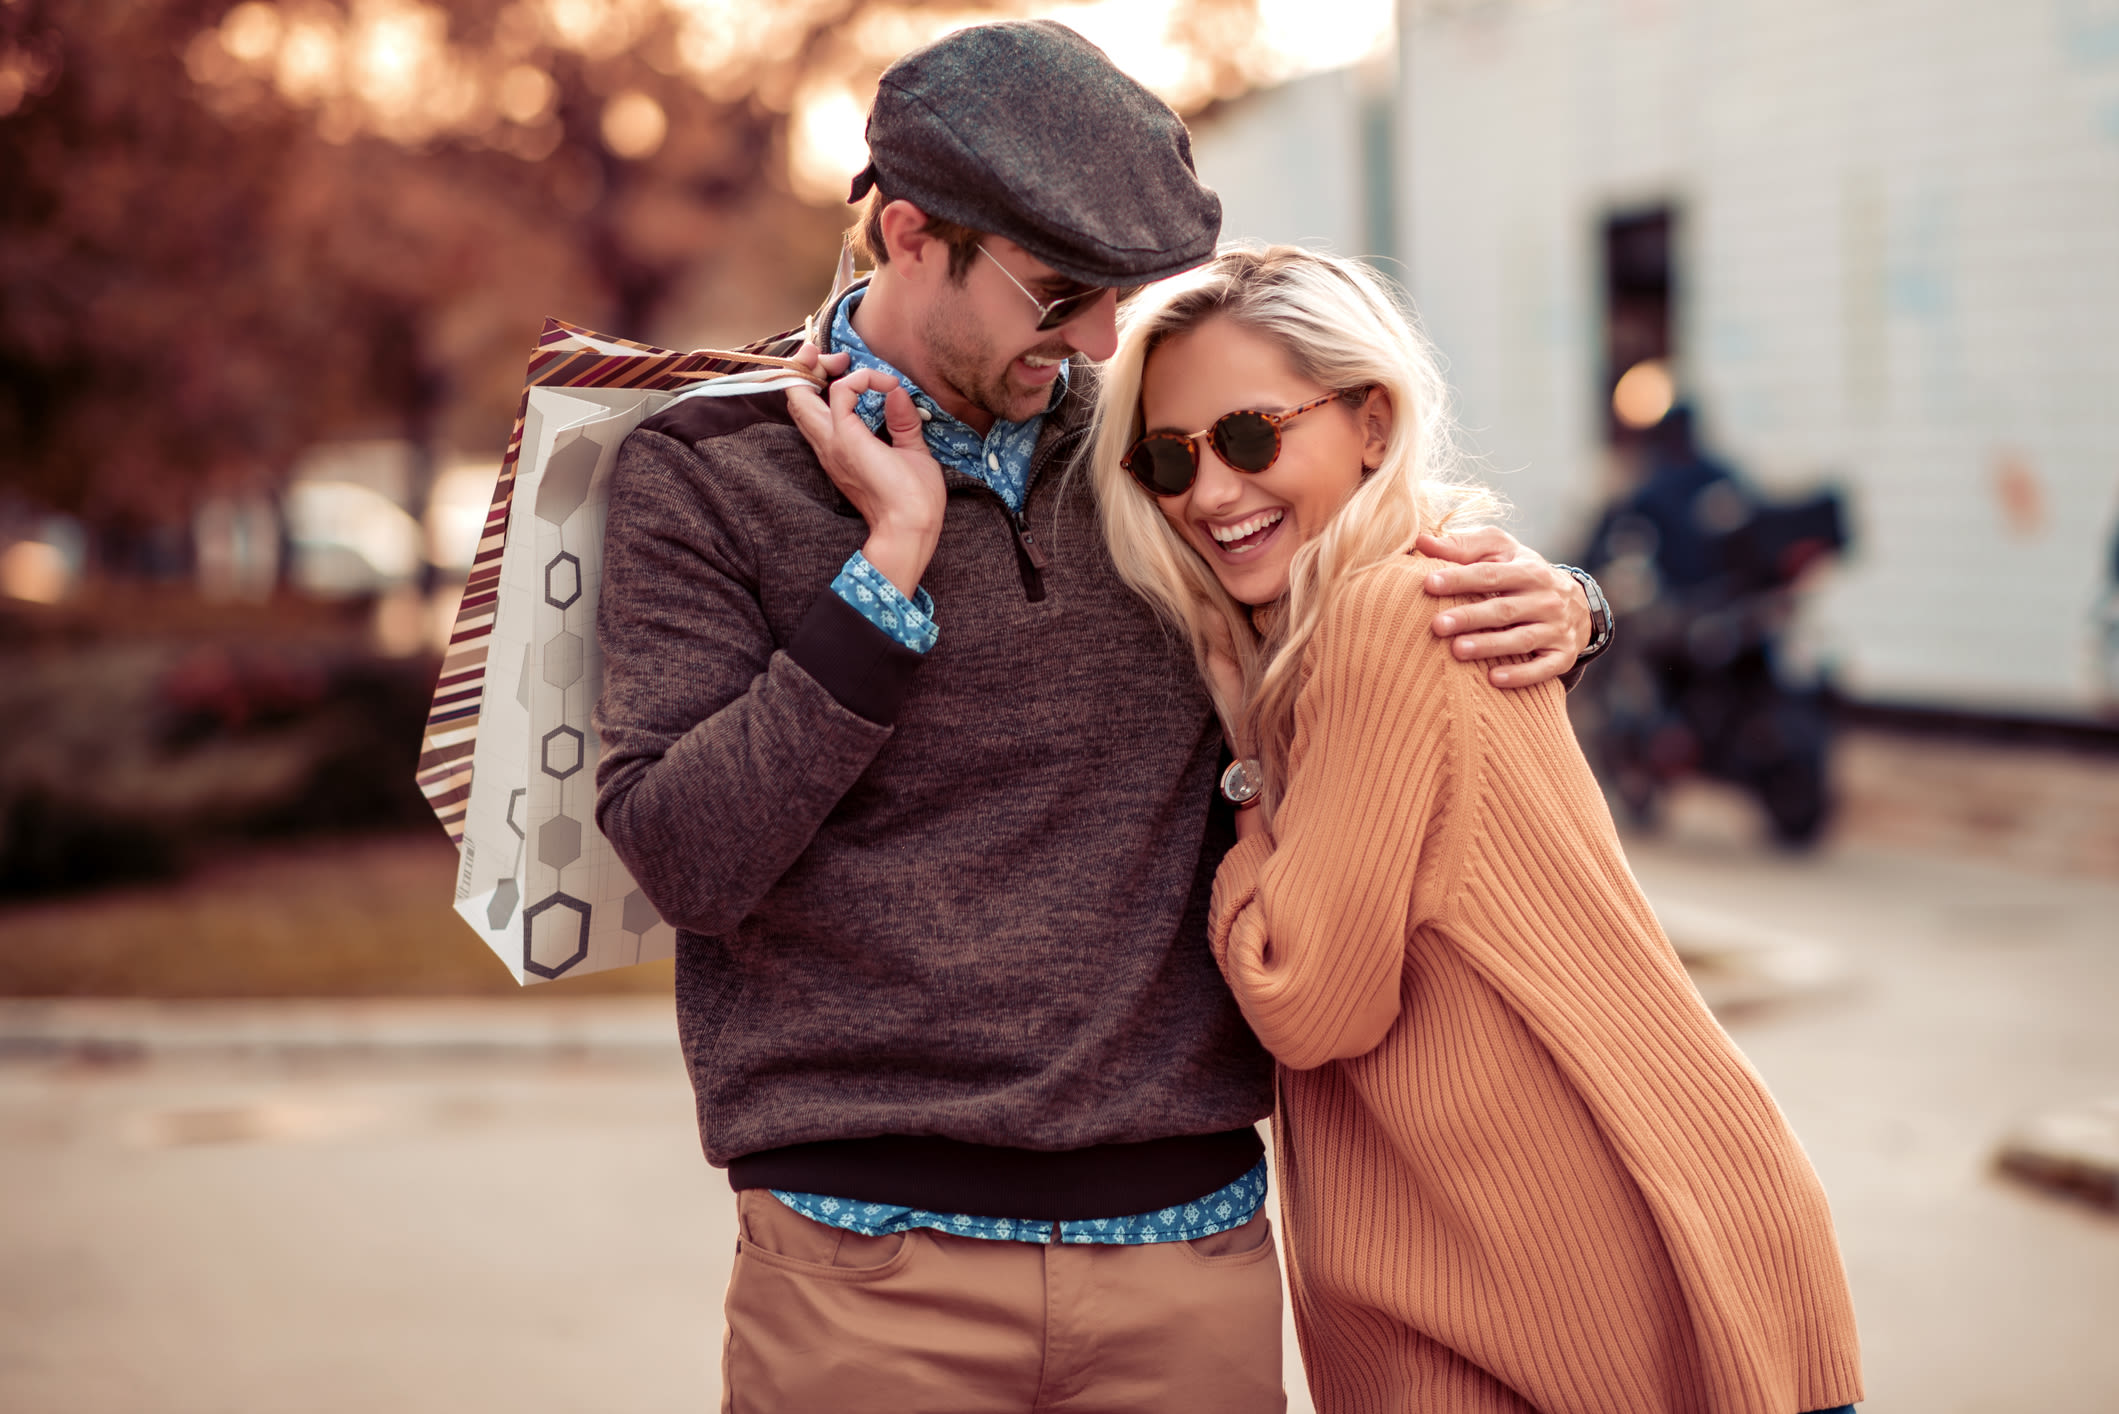 Boyfriend can recall every outfit girlfriend has worn—"Bar has been raised"